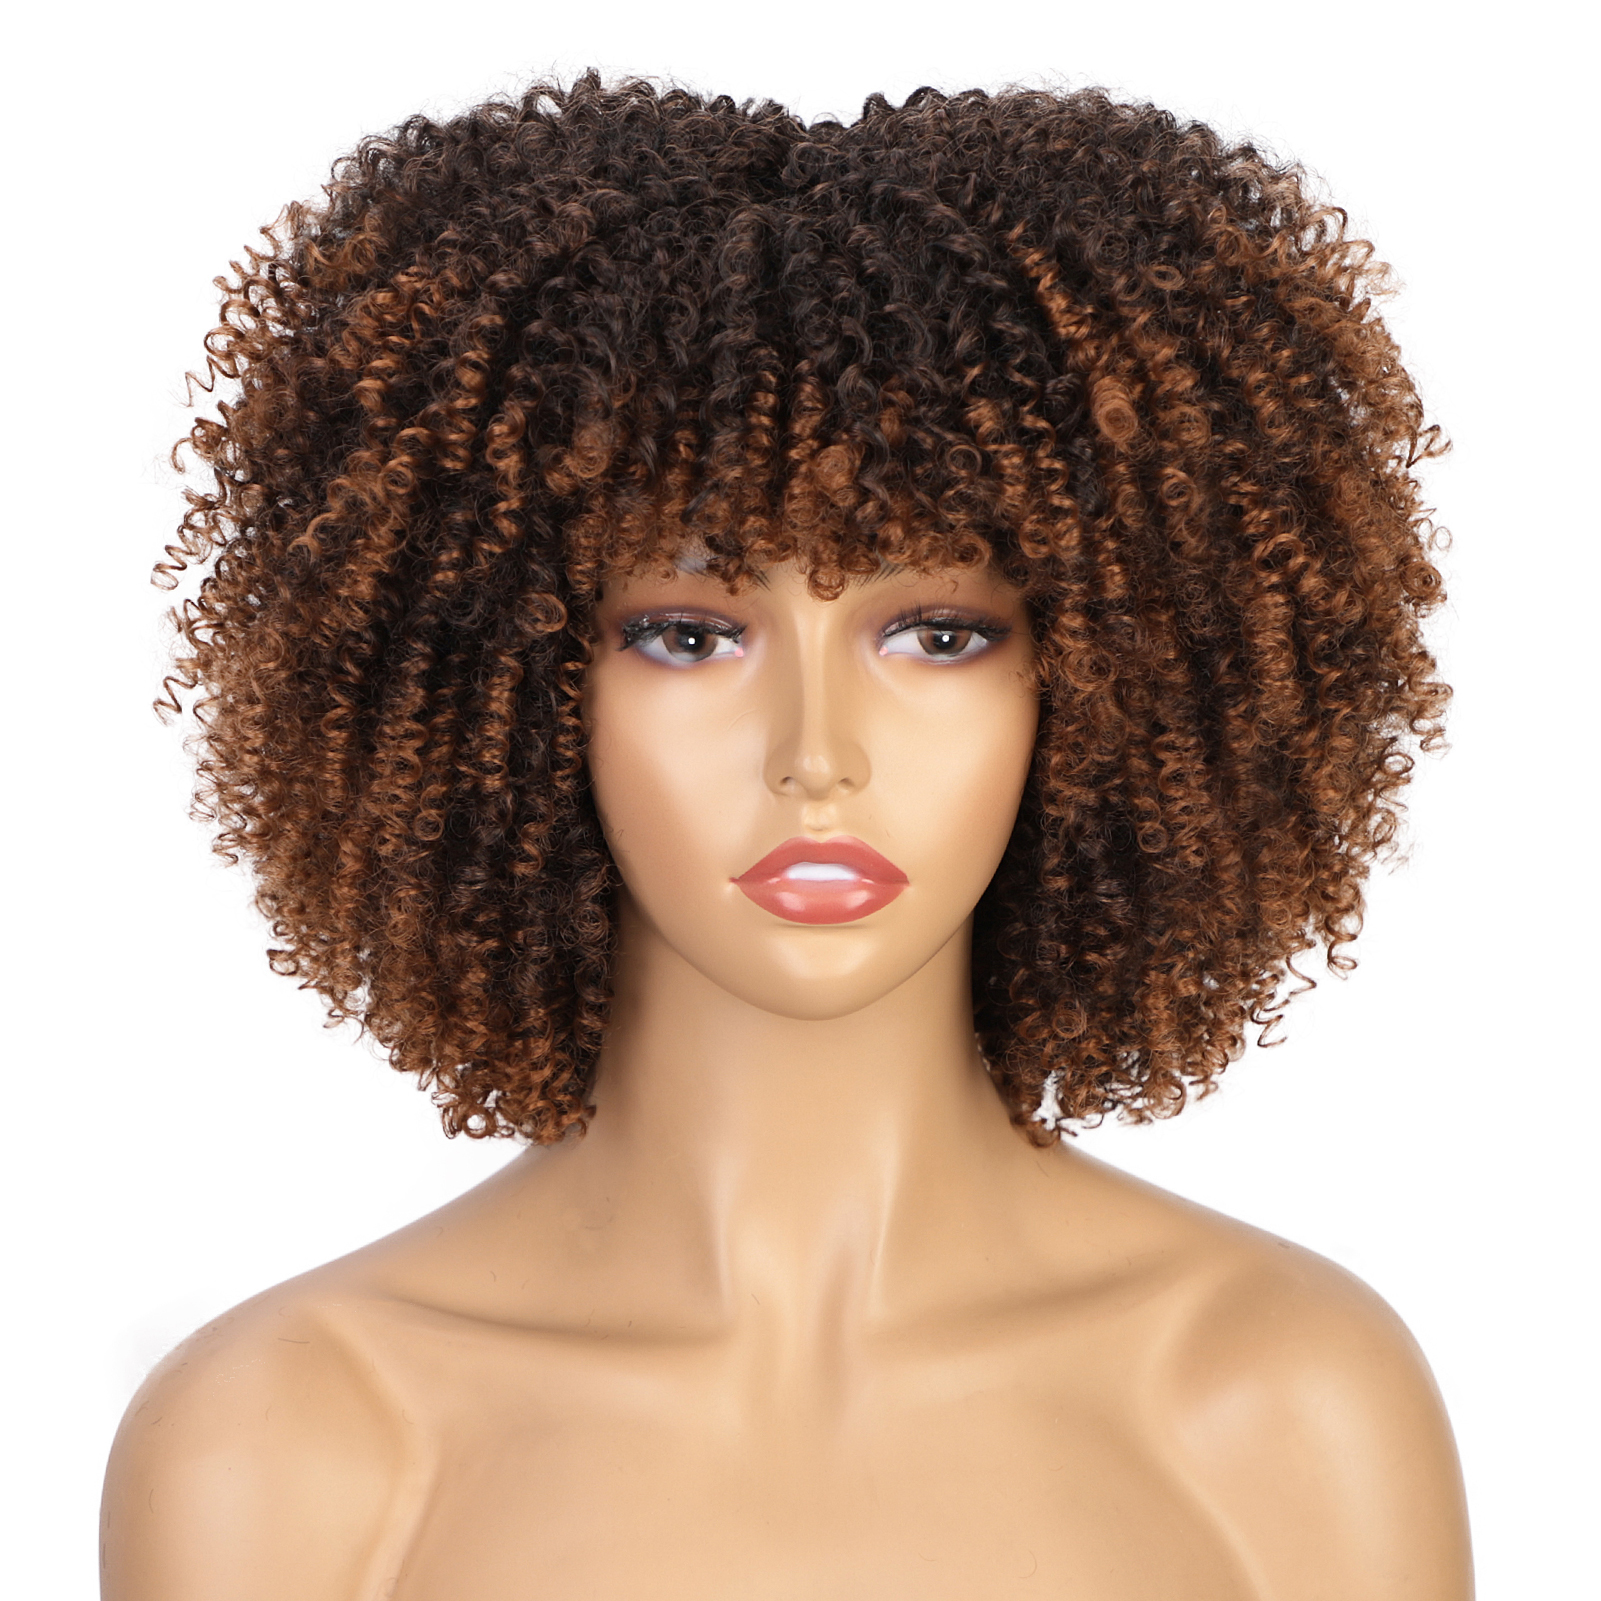 Short Curly Wigs For Women Synthetic Cosplay Wig Glueless Natural Ombre Curly Hair Wig With Bangs